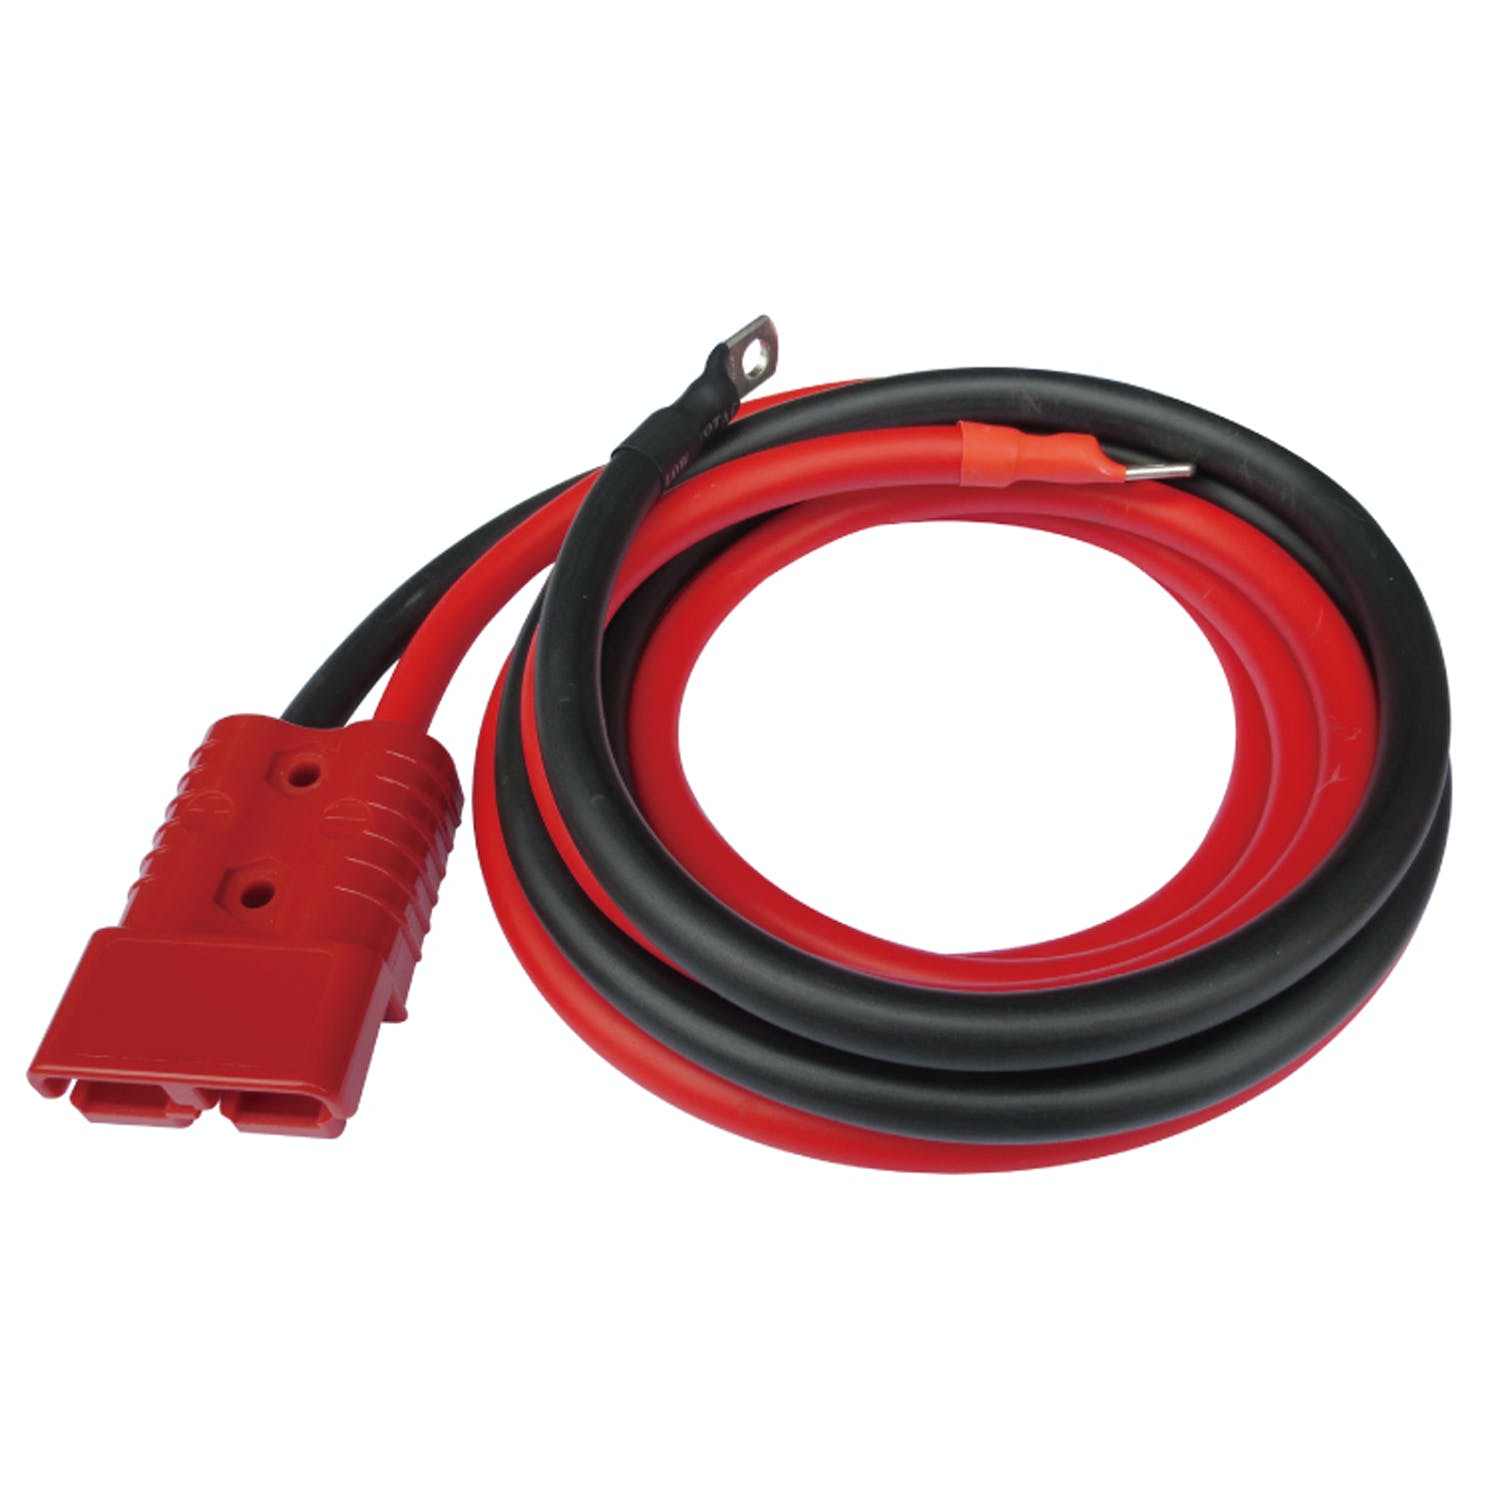 Bulldog Winch Co LLC 20197 Booster Cable Set 20ft 2ga w/Quick Connects and 7.5ft truck leads